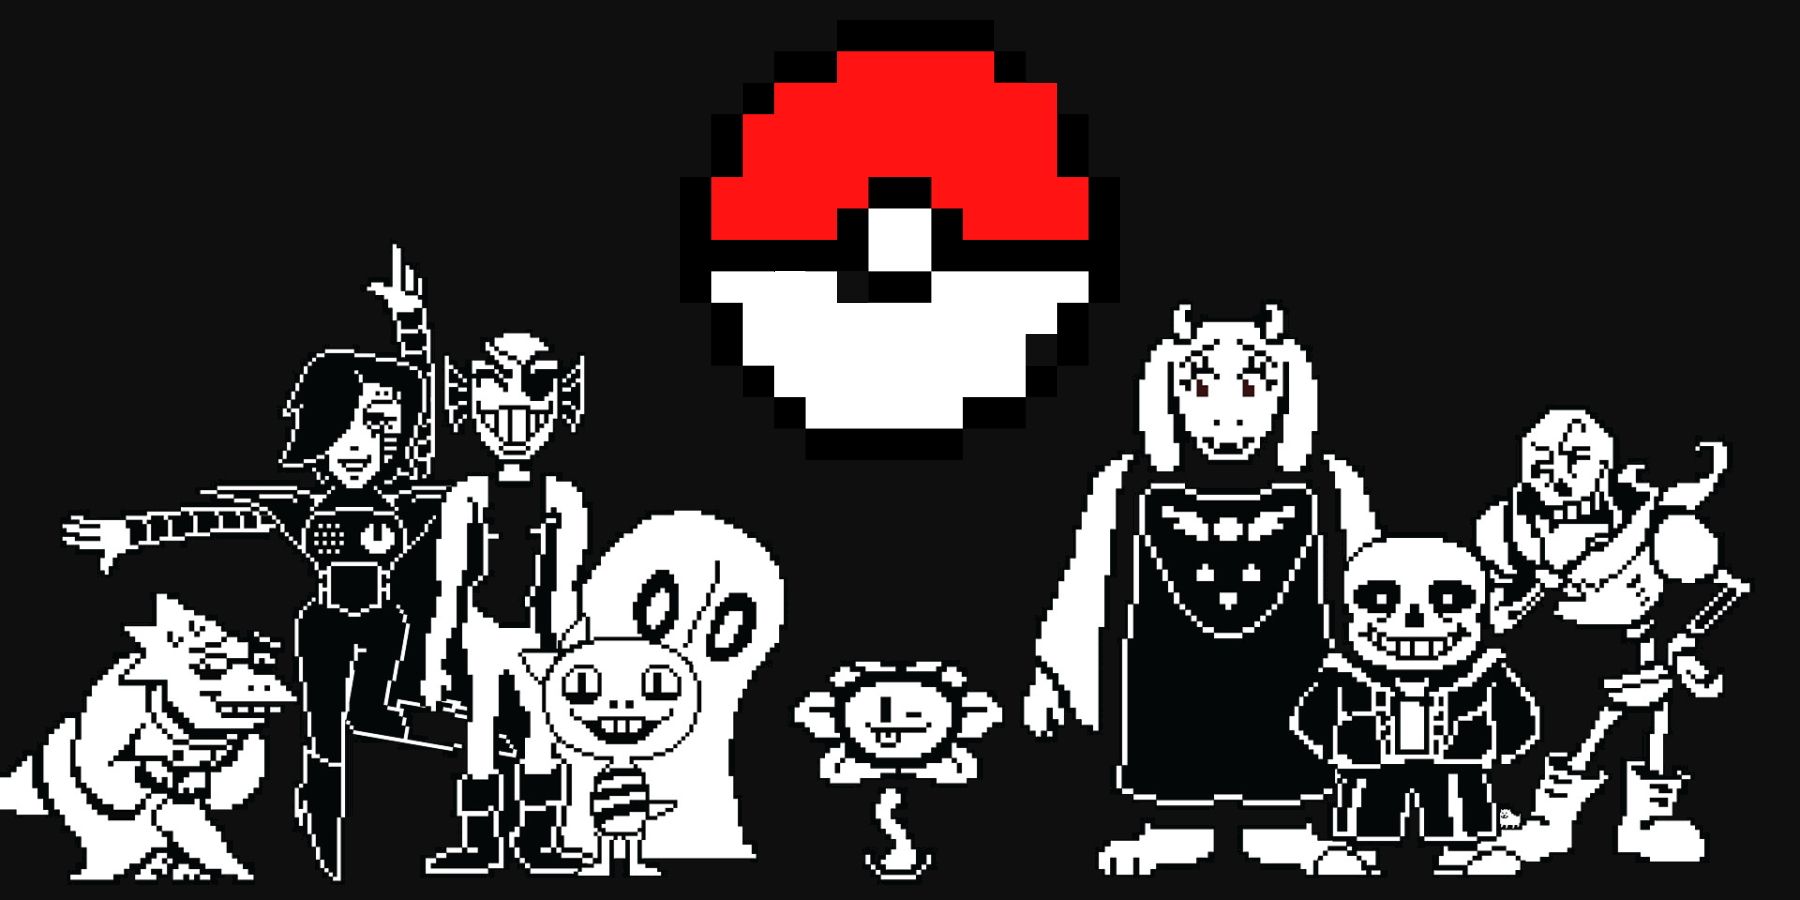 Not to mention Toby Fox, the creator of Undyne, worked on the soundtrack  for Pokèmon. Vaporeon is a Pokèmon. : r/Undertale